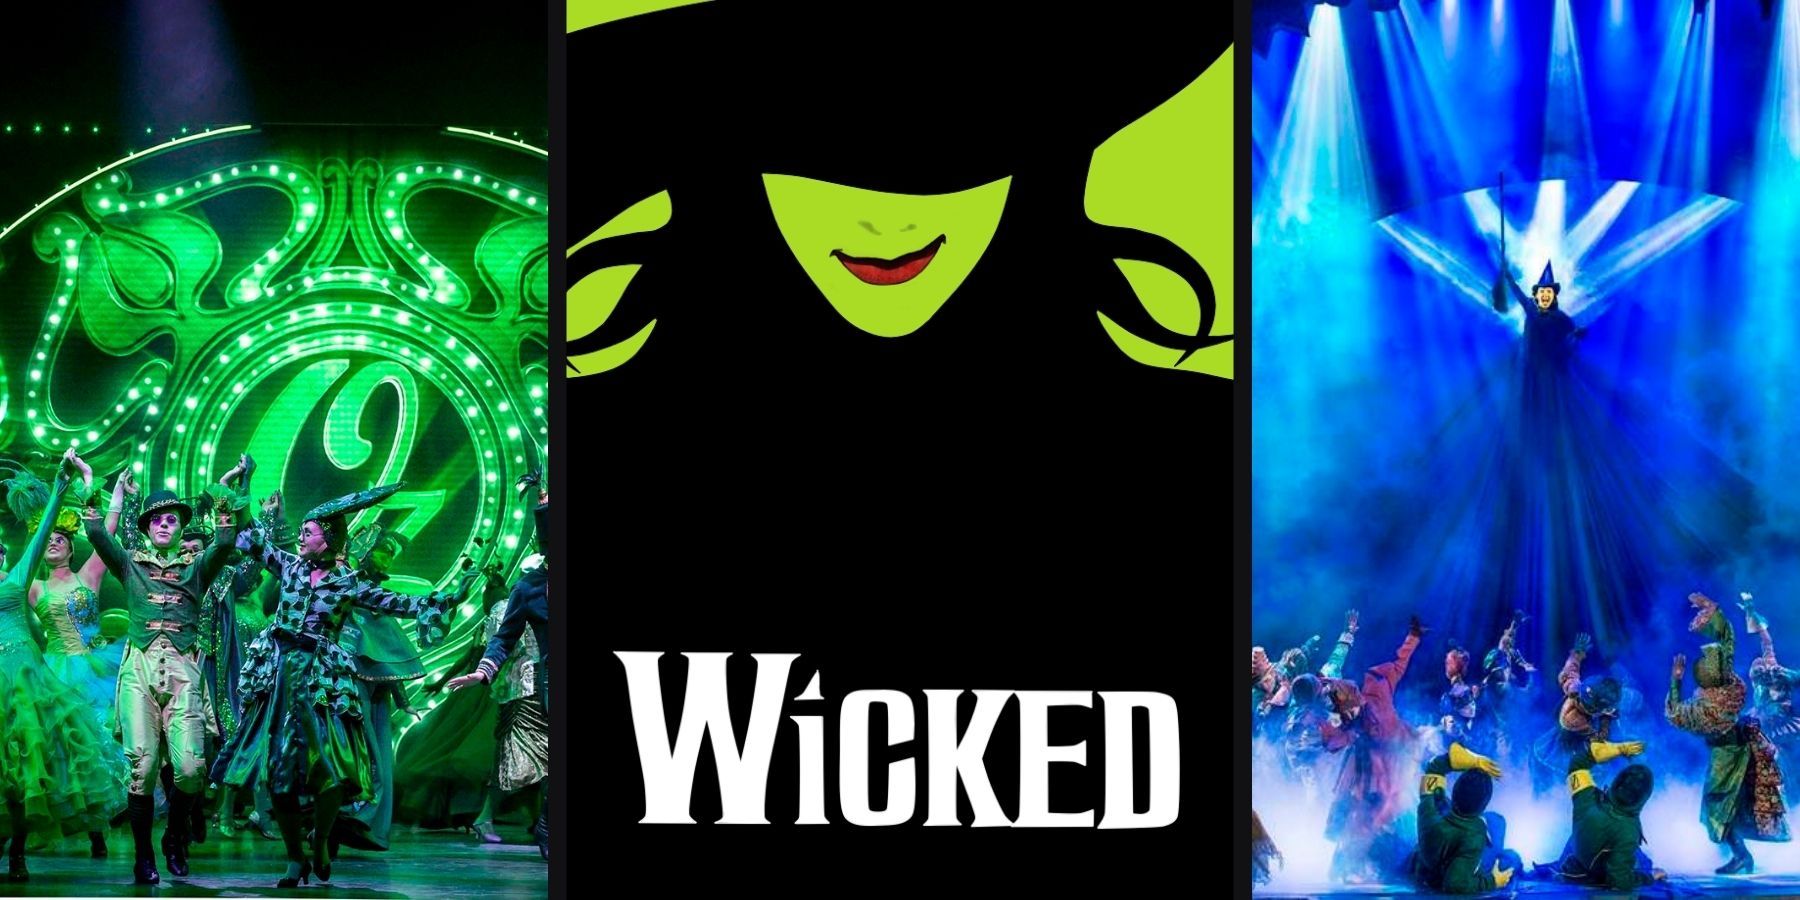 Wicked Poster with Performance